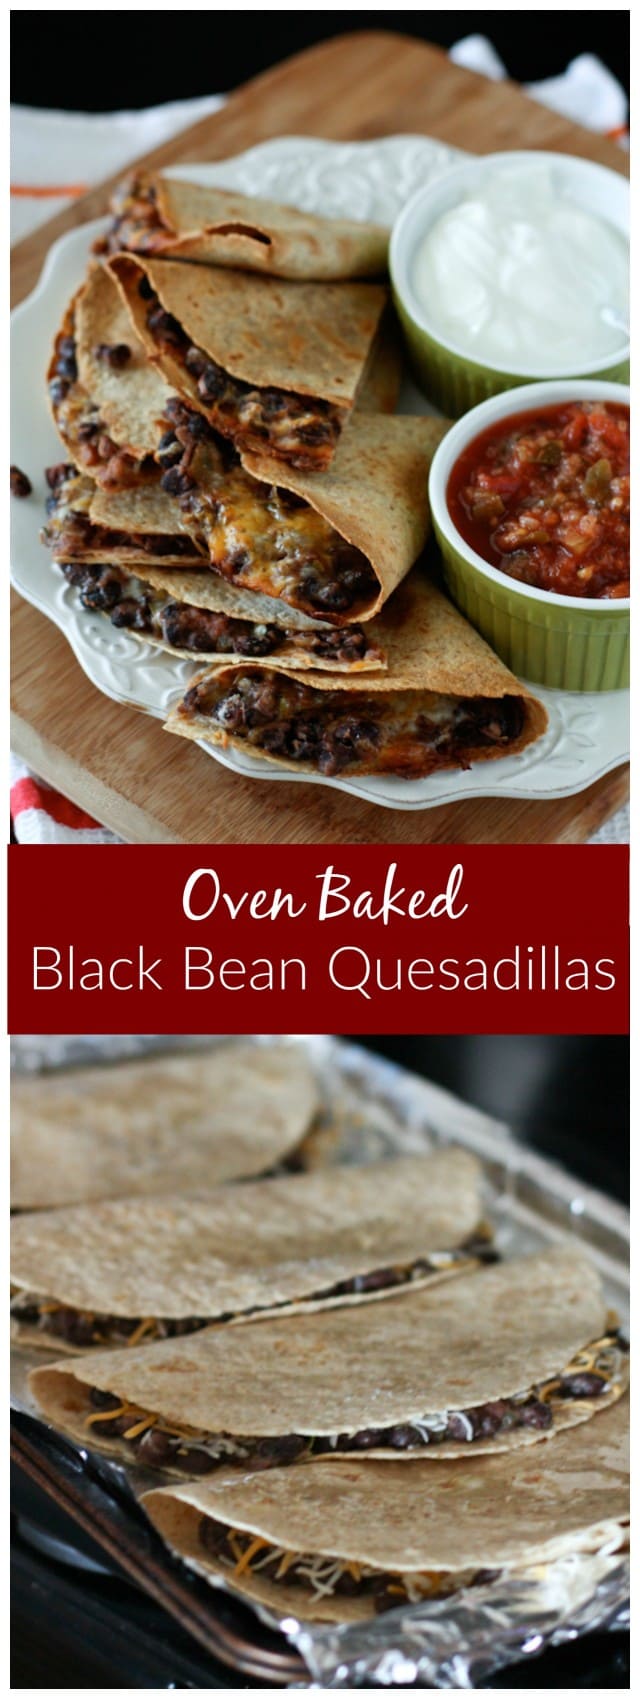 Oven baked Black Bean and Cheese Quesadillas make a great option for family dinner on a busy night, or when you need to cook for a crowd!